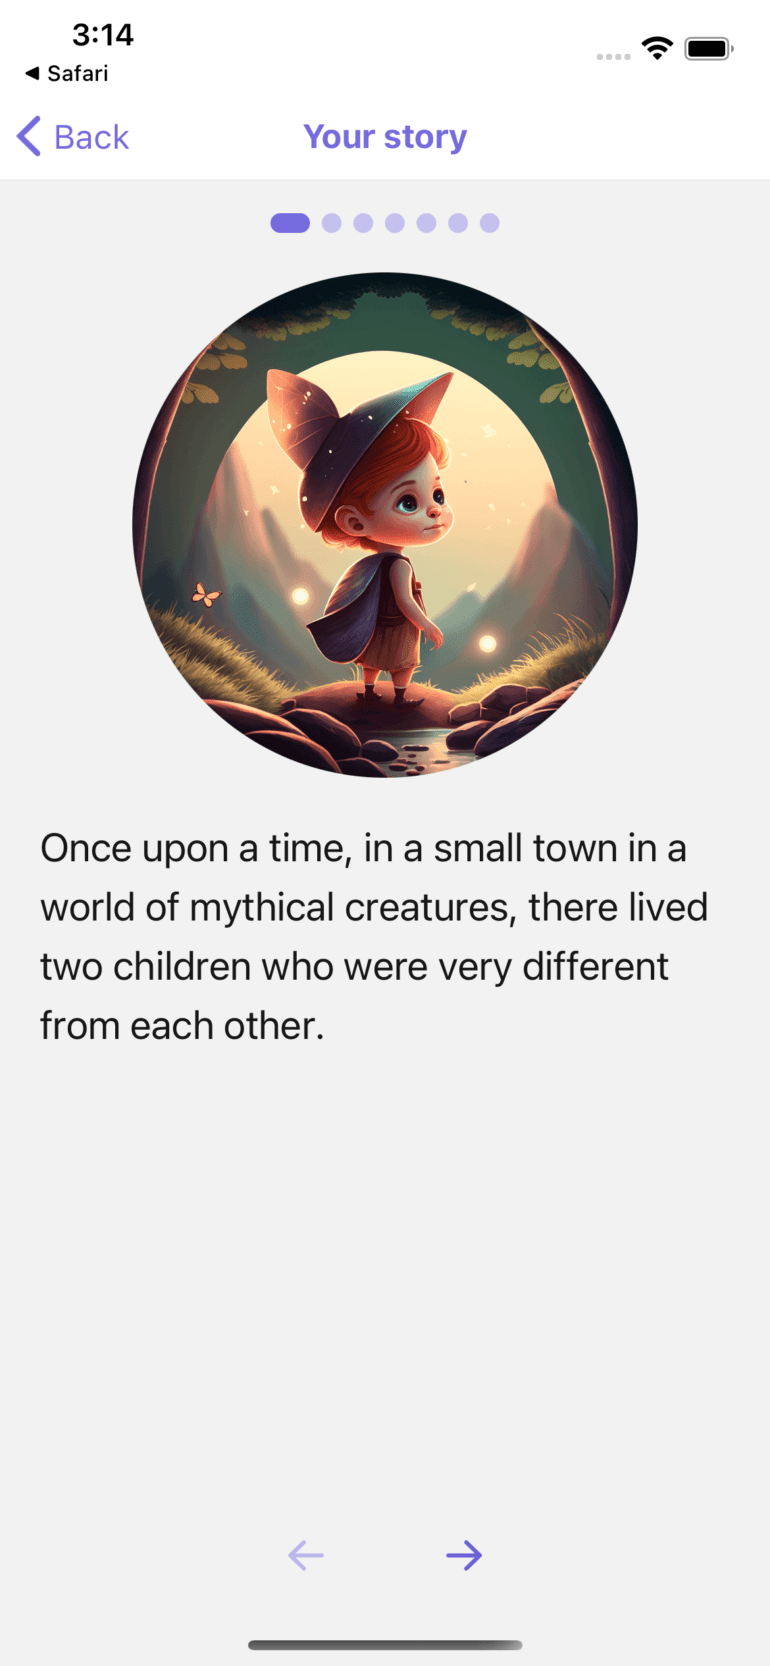 Stories and matching images are presented in an easy-to-read swipe interface.